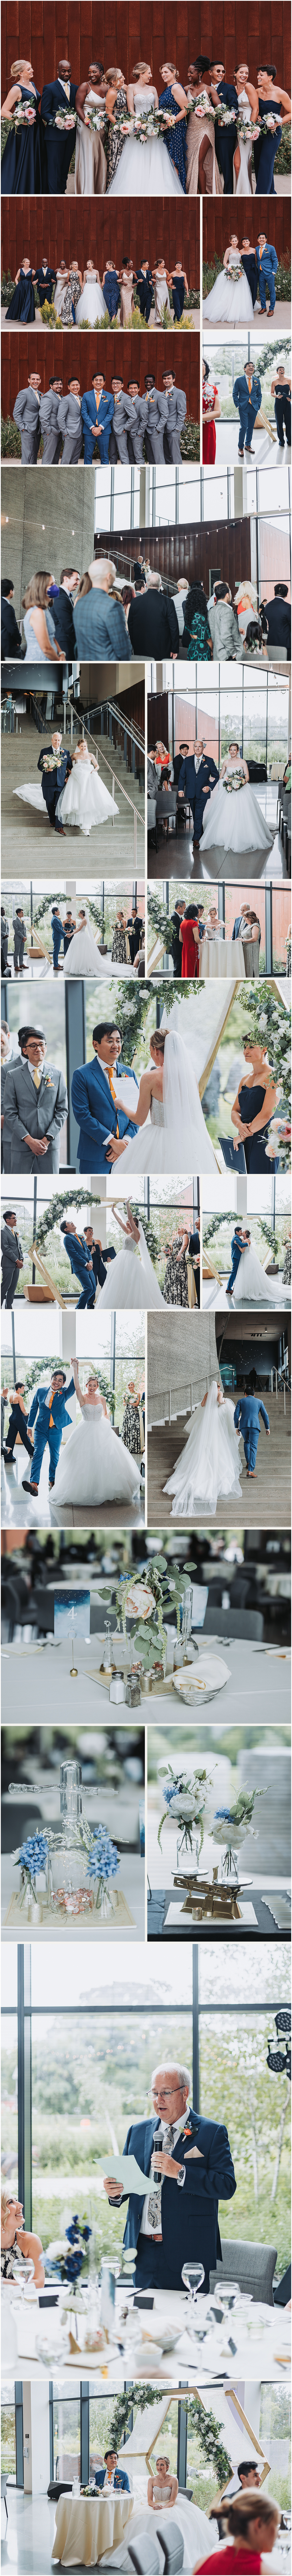 collage of the Bell Museum wedding photos, including indoor and outdoor wedding photos, wedding toast, and wedding speeches